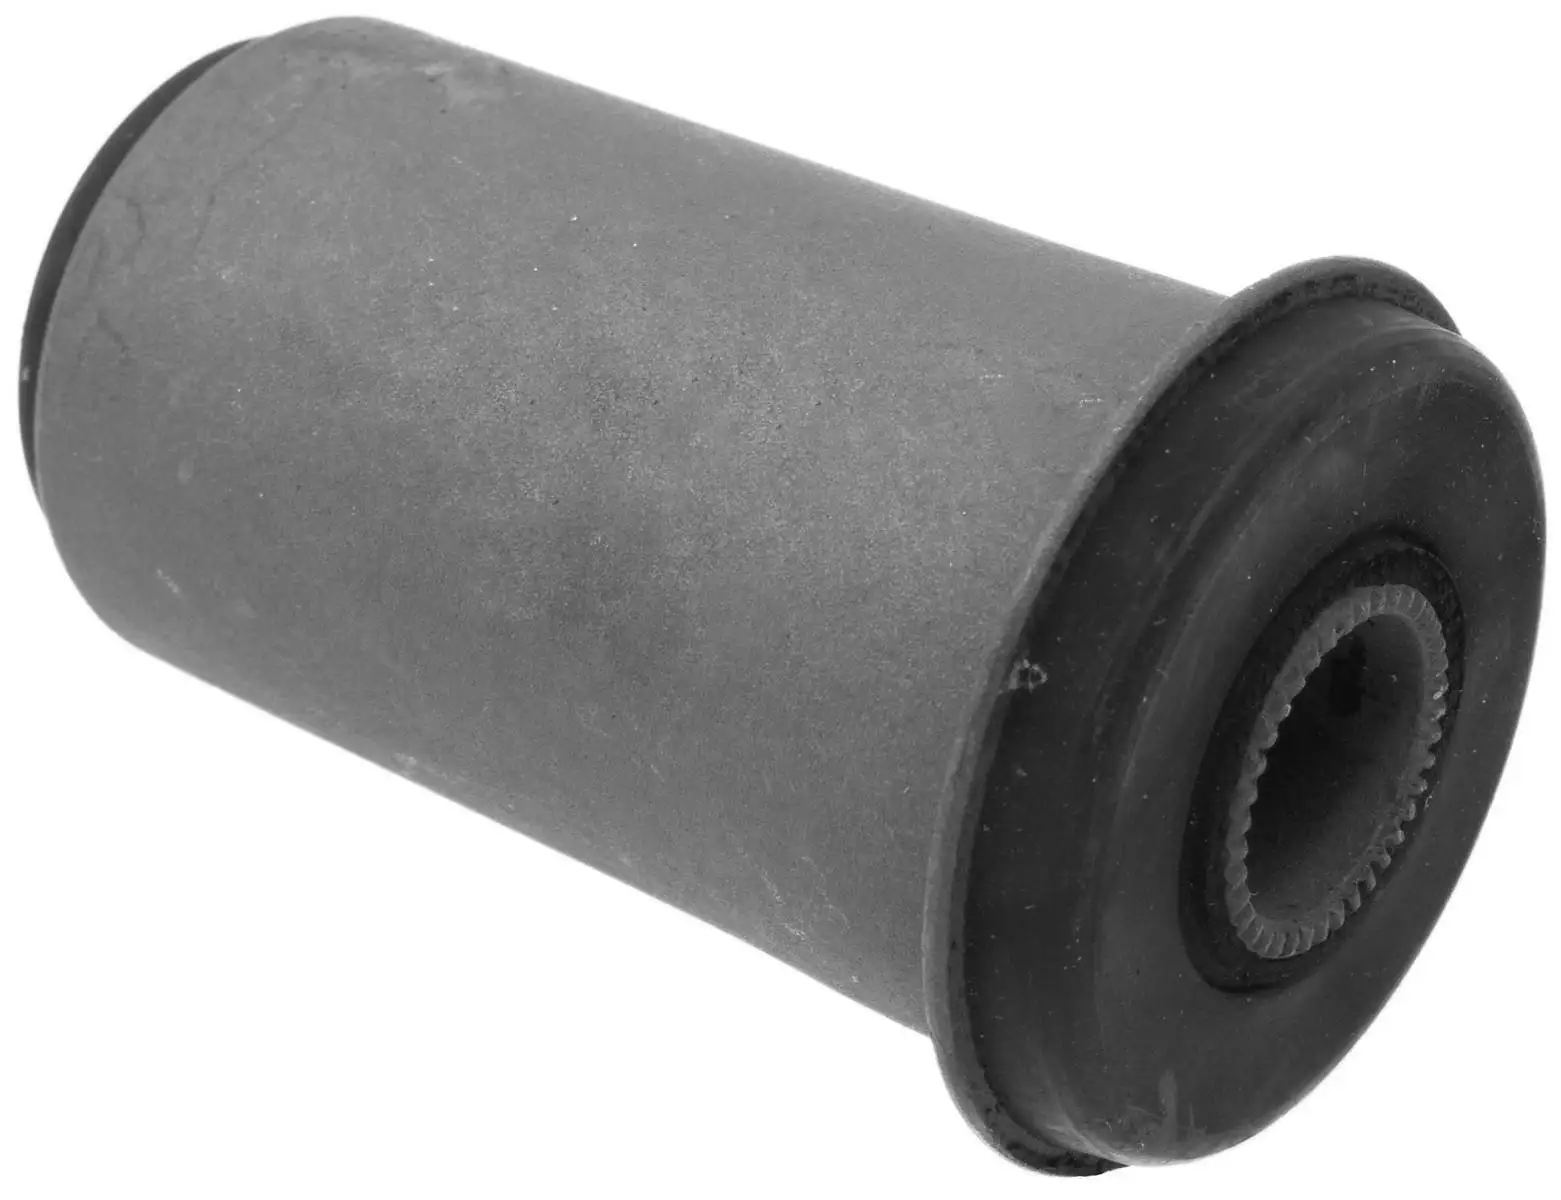 Arm Bushing Mb633070 for Front Lower Control Arm For Mitsubishi